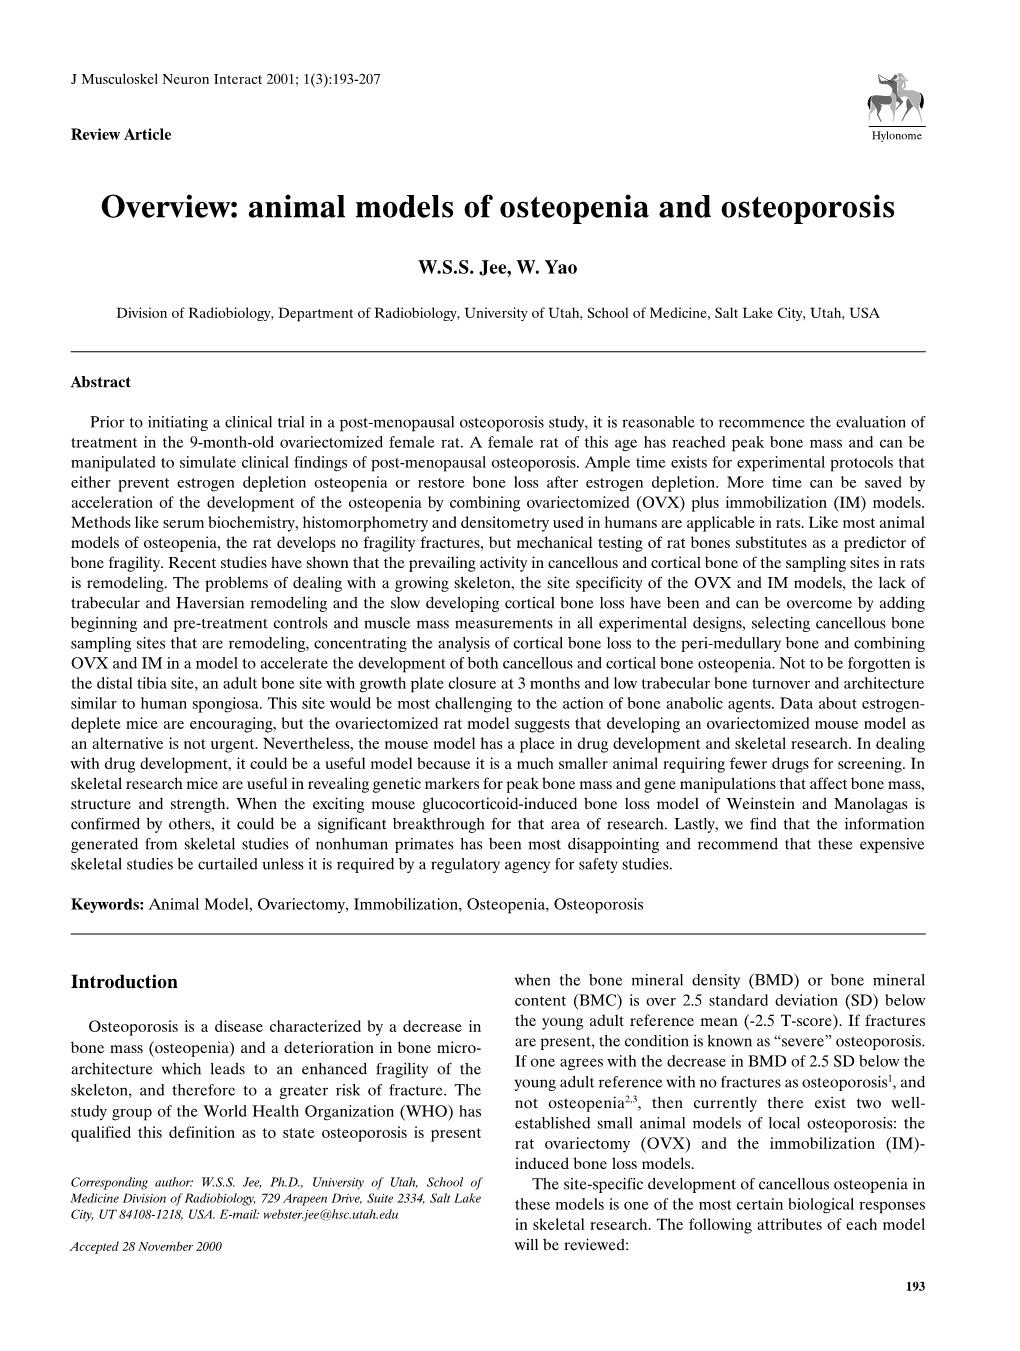 Overview: Animal Models of Osteopenia and Osteoporosis